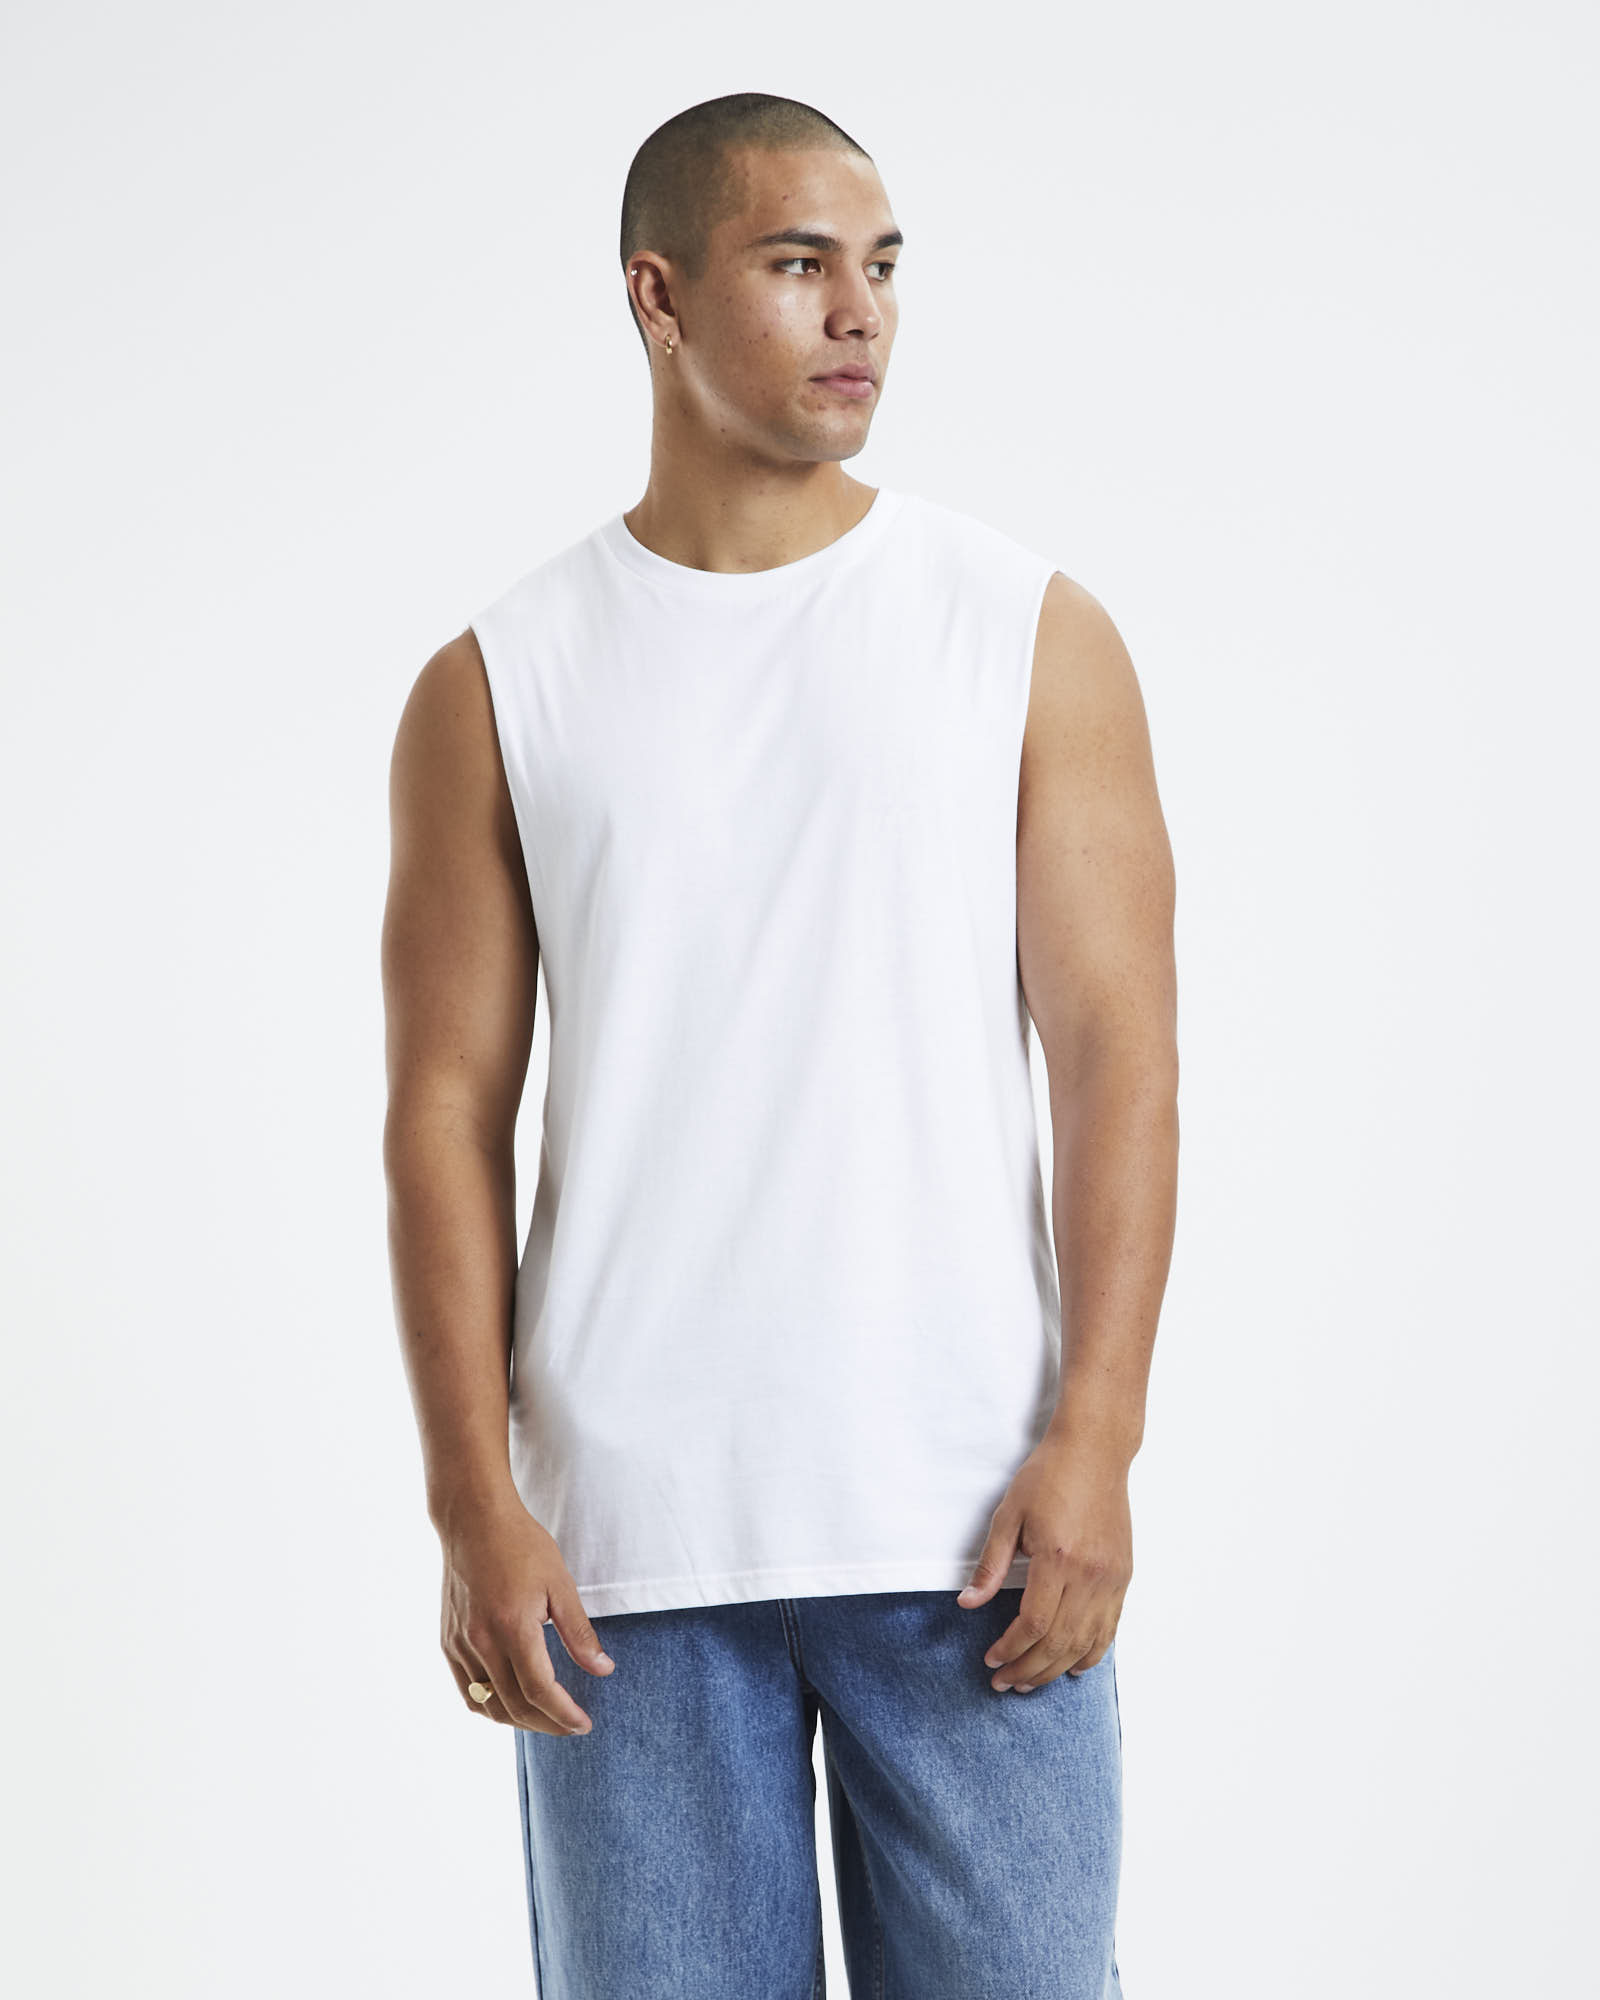 General Pants Co. Basics Muscle Tank - White | SurfStitch